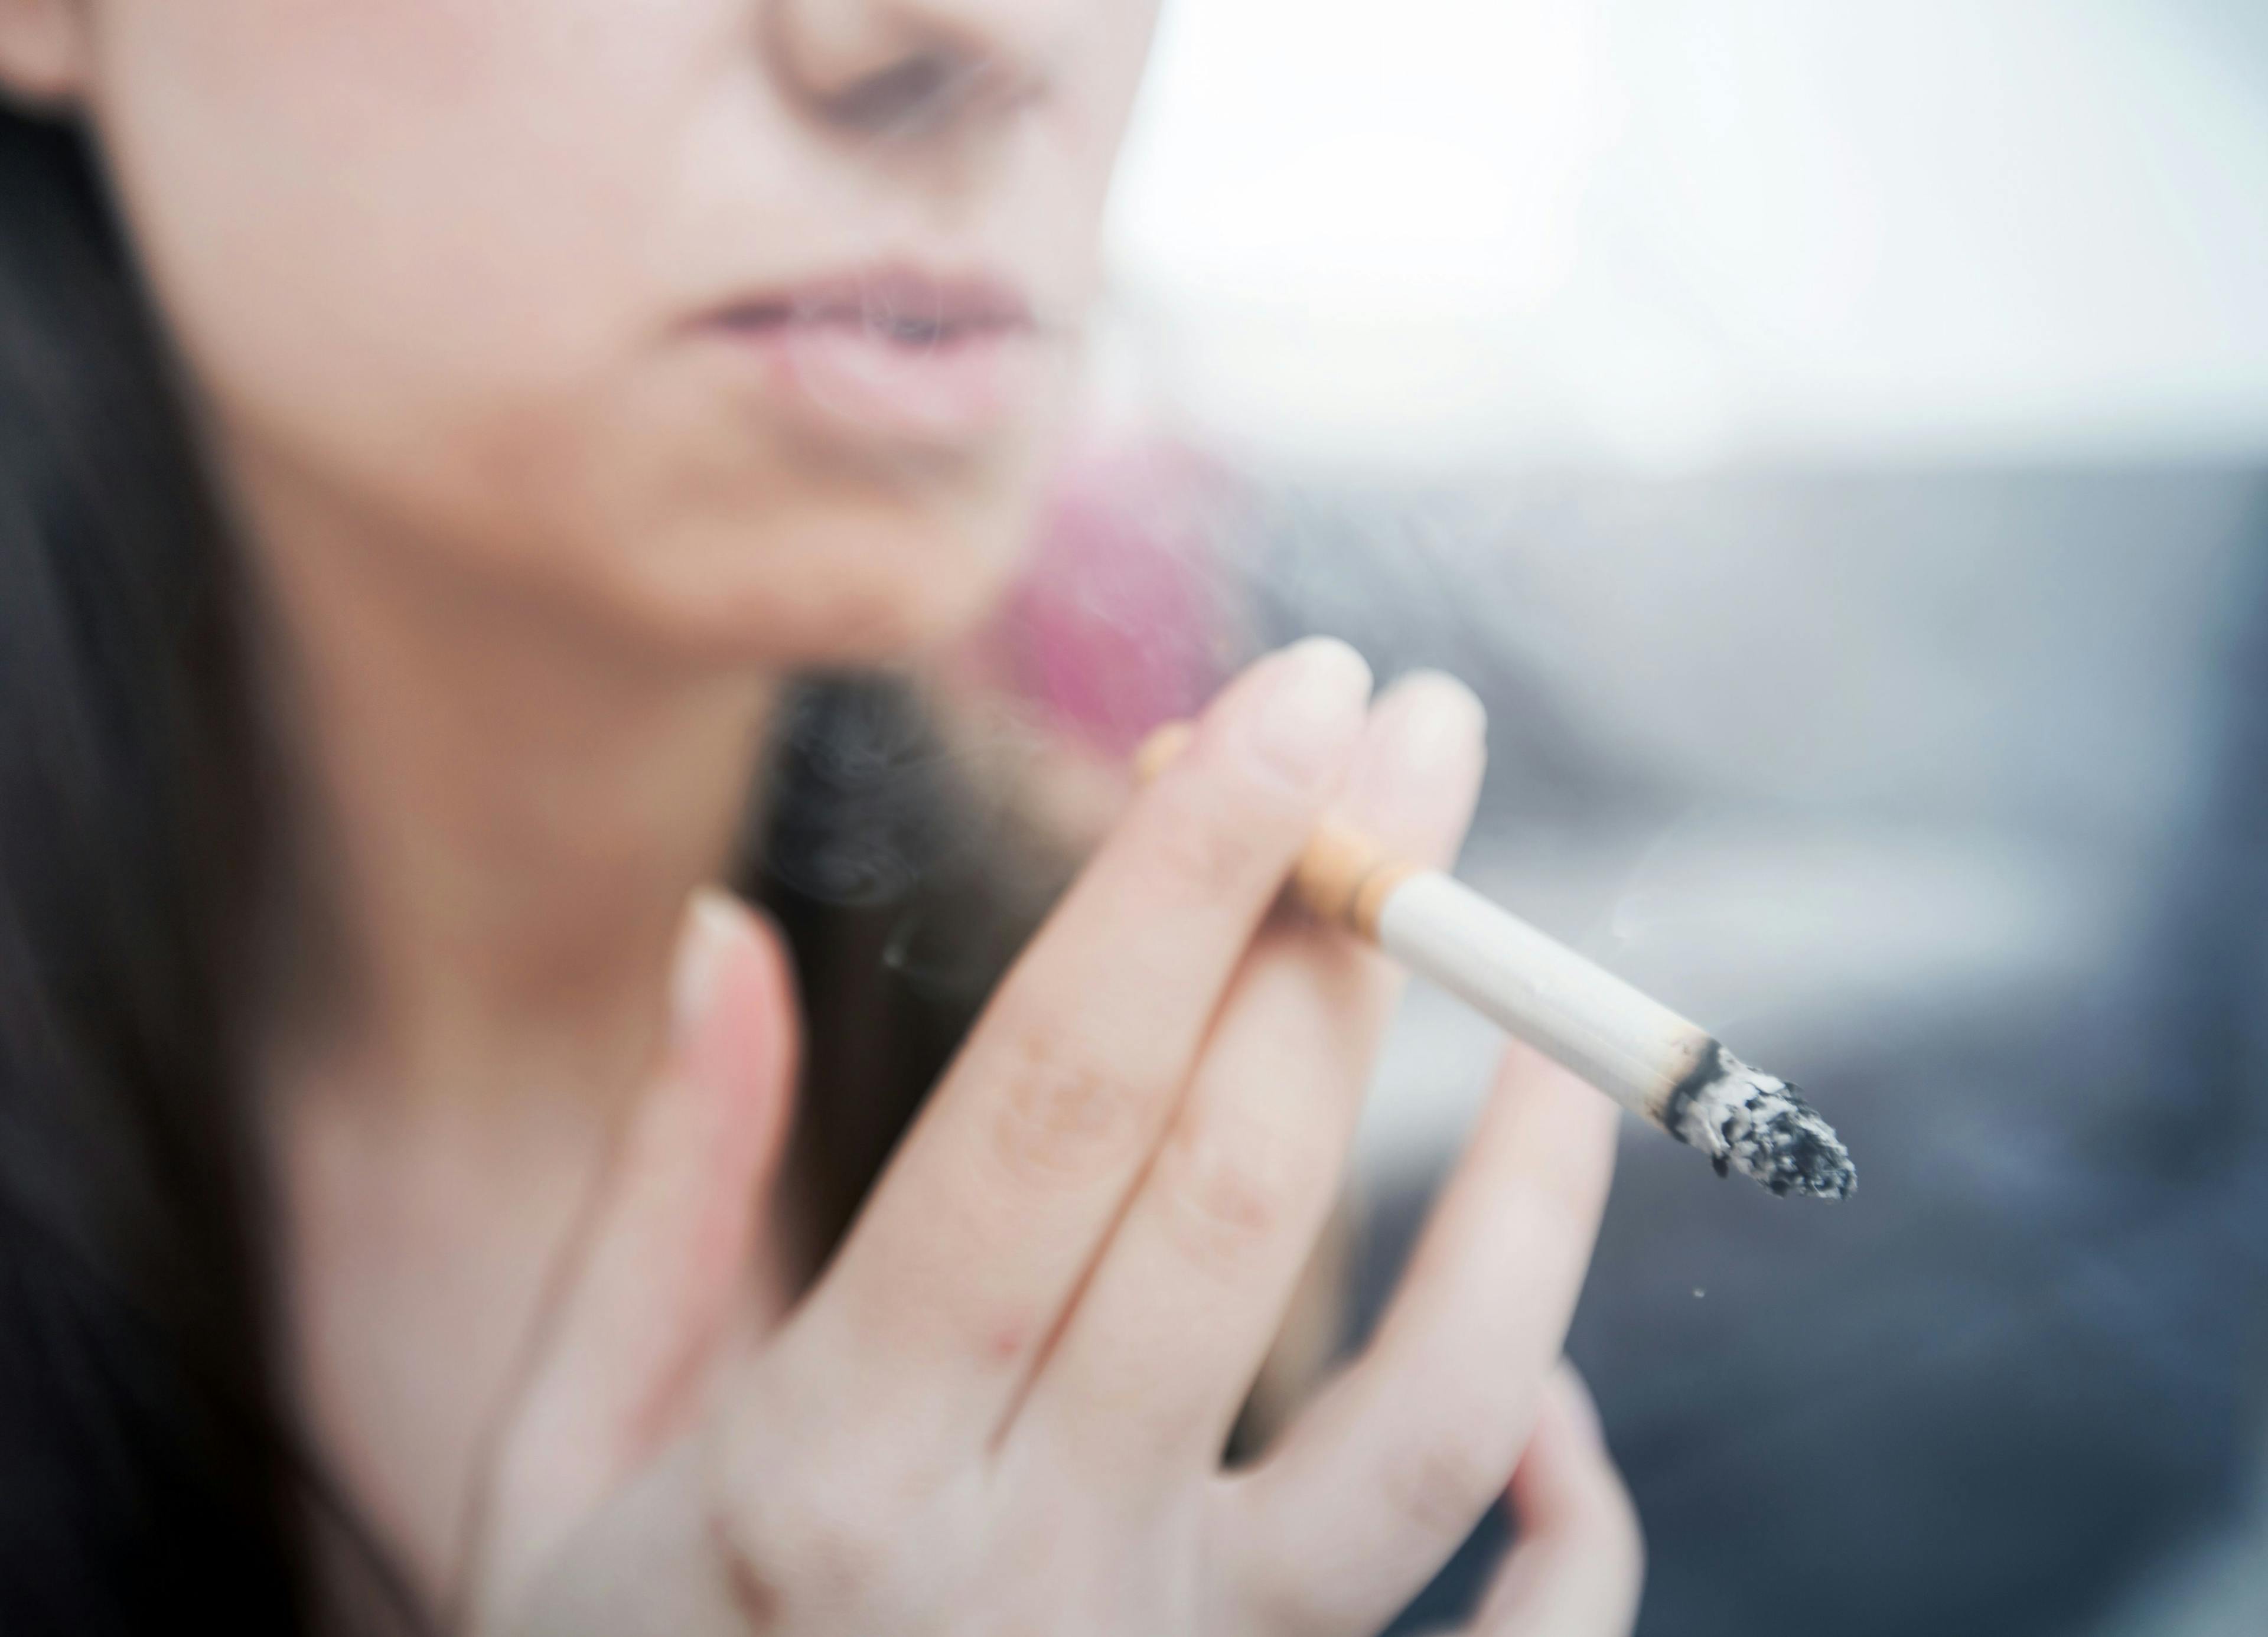 Smoking rate in underserved communities double that of general population, study shows